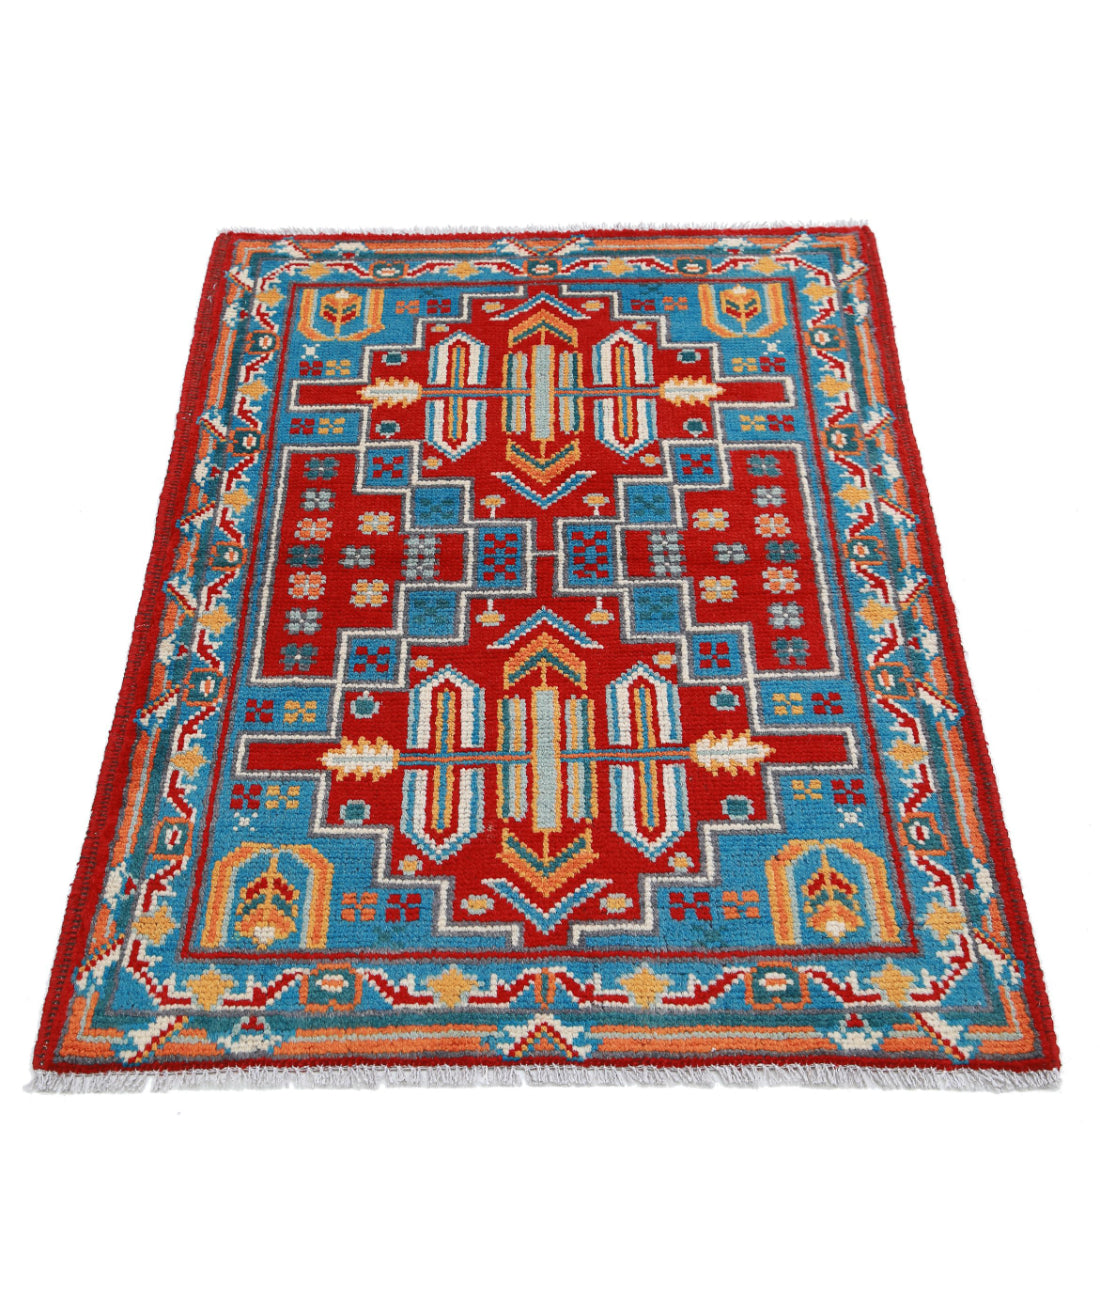 Revival 2'8'' X 3'11'' Hand-Knotted Wool Rug 2'8'' x 3'11'' (80 X 118) / Red / Blue